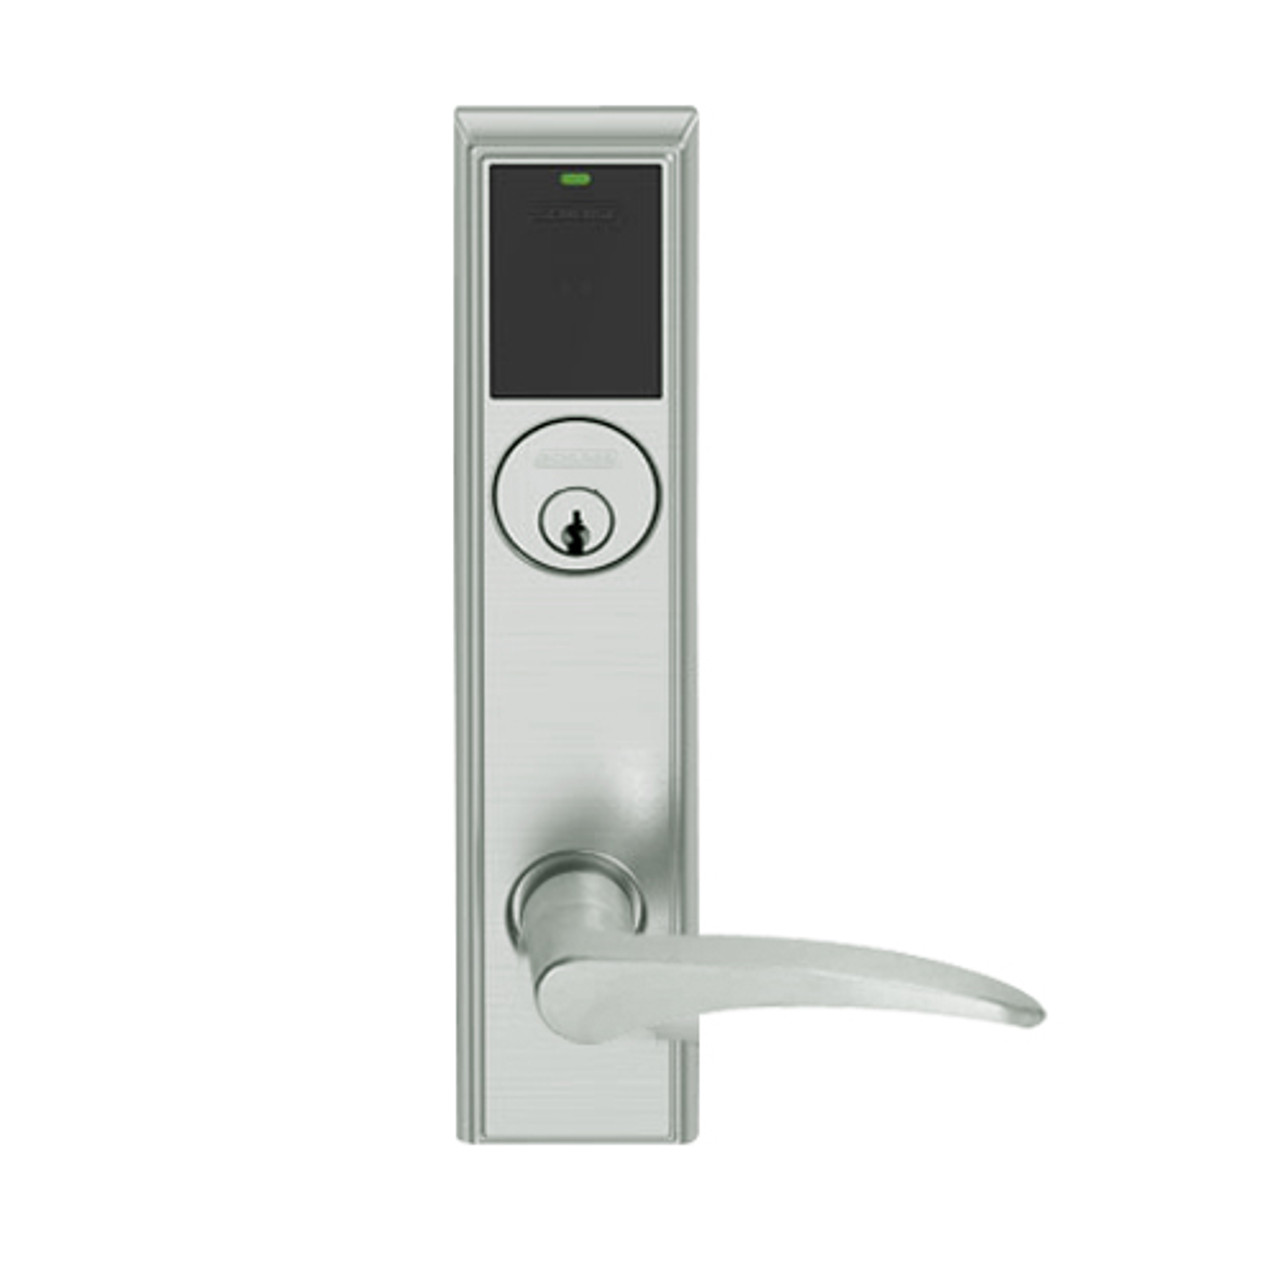 LEMS-ADD-P-12-619-LH Schlage Storeroom Wireless Addison Mortise Lock with LED and 12 Lever in Satin Nickel